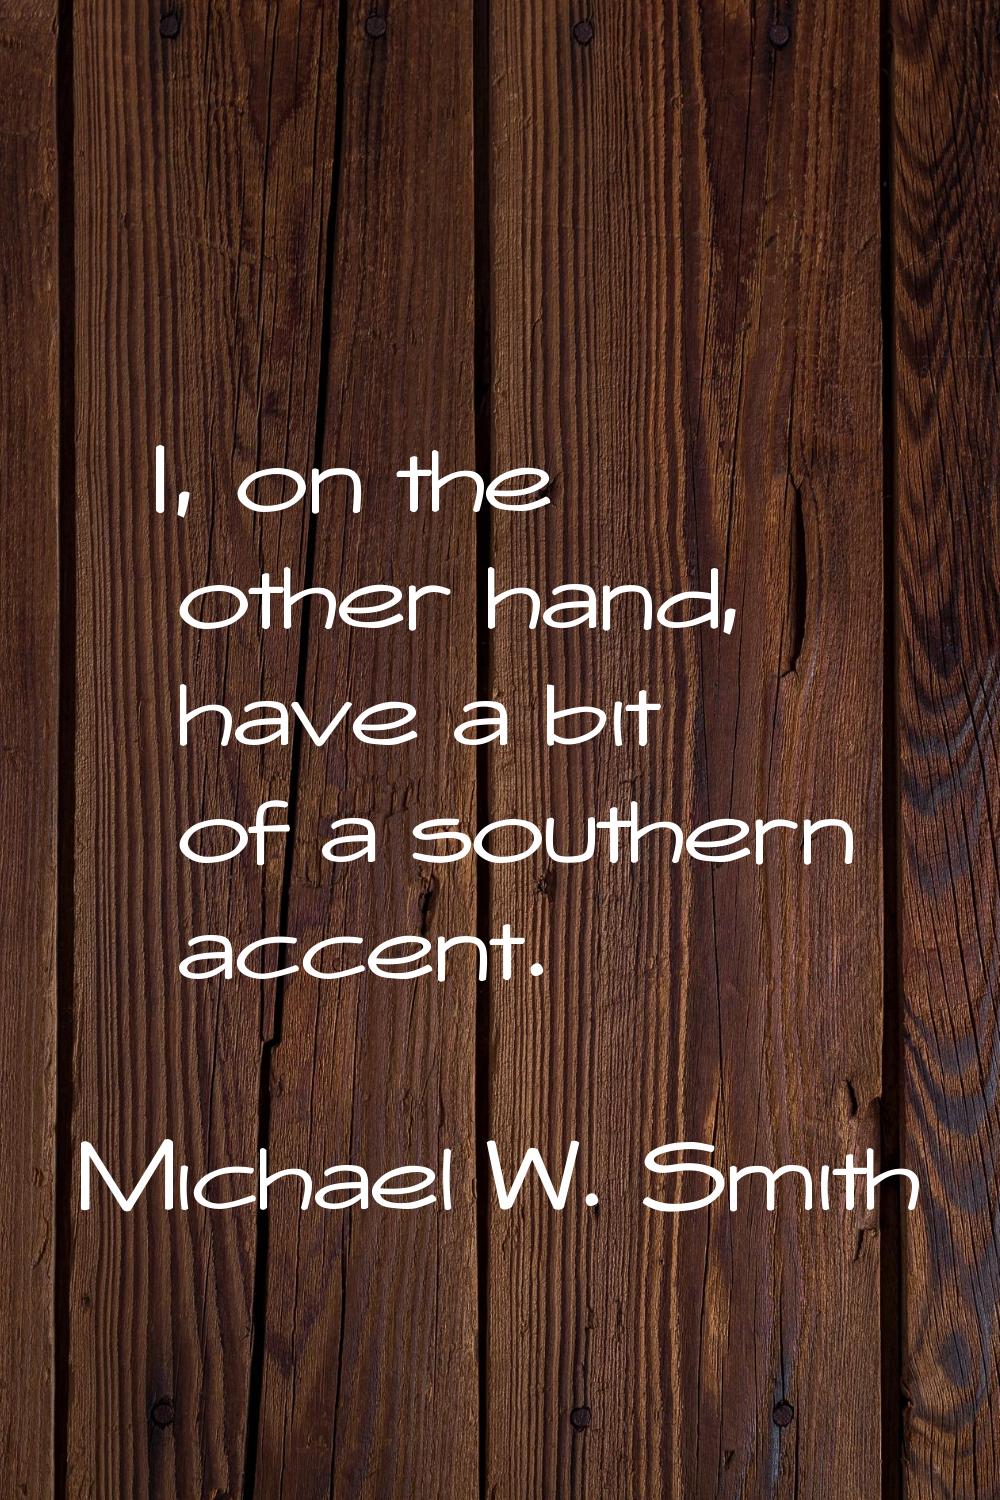 I, on the other hand, have a bit of a southern accent.